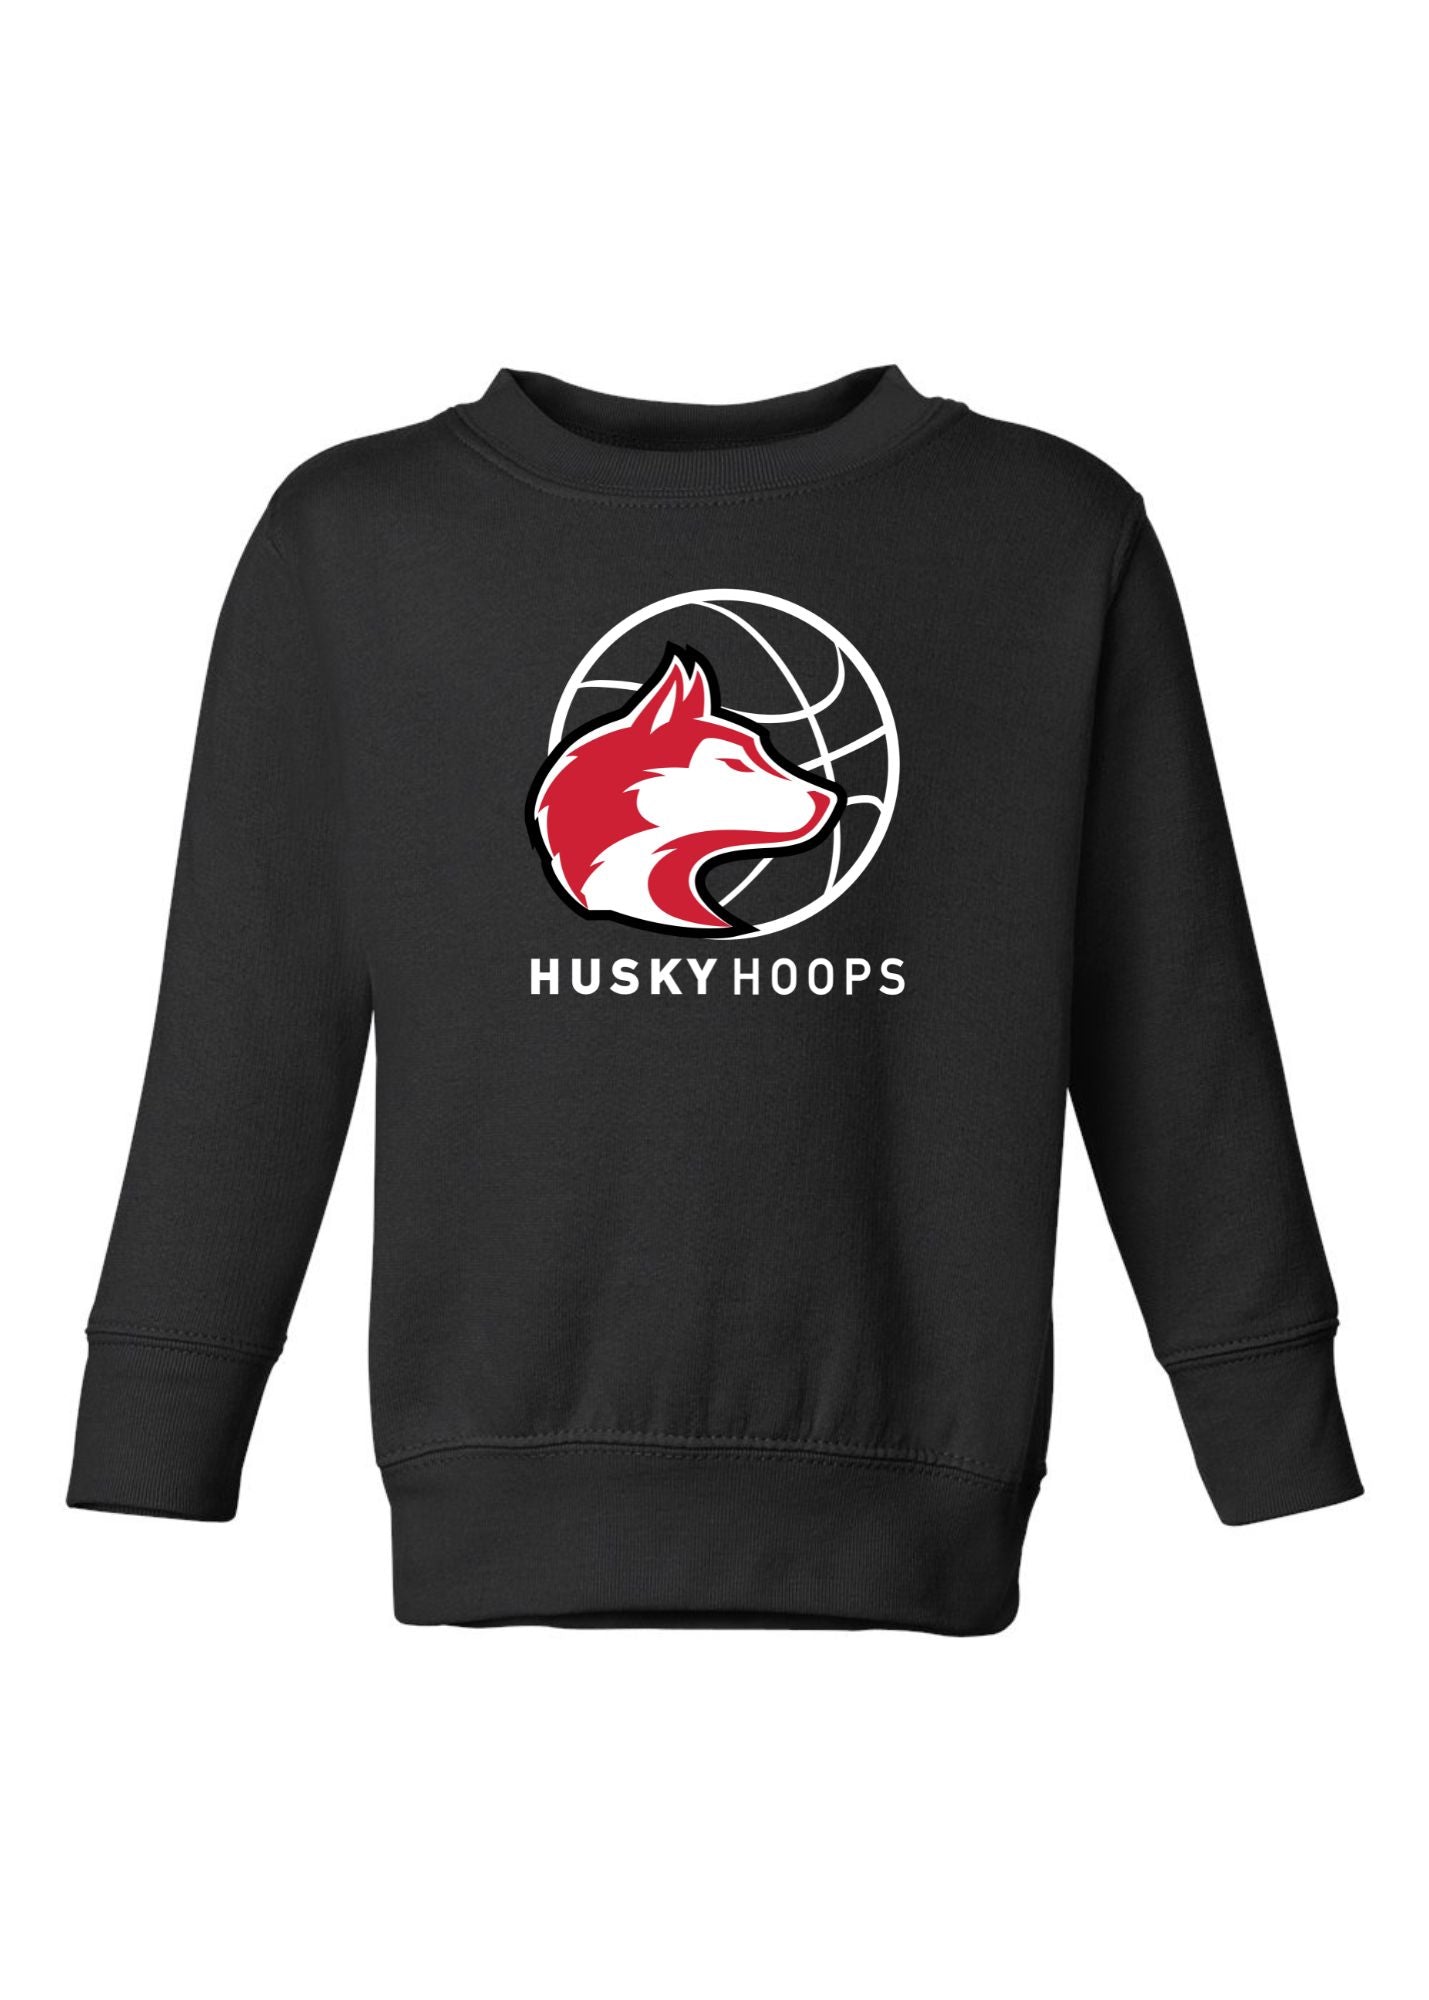 Husky Hoops | Pullover | Kids-Sister Shirts-Sister Shirts, Cute & Custom Tees for Mama & Littles in Trussville, Alabama.